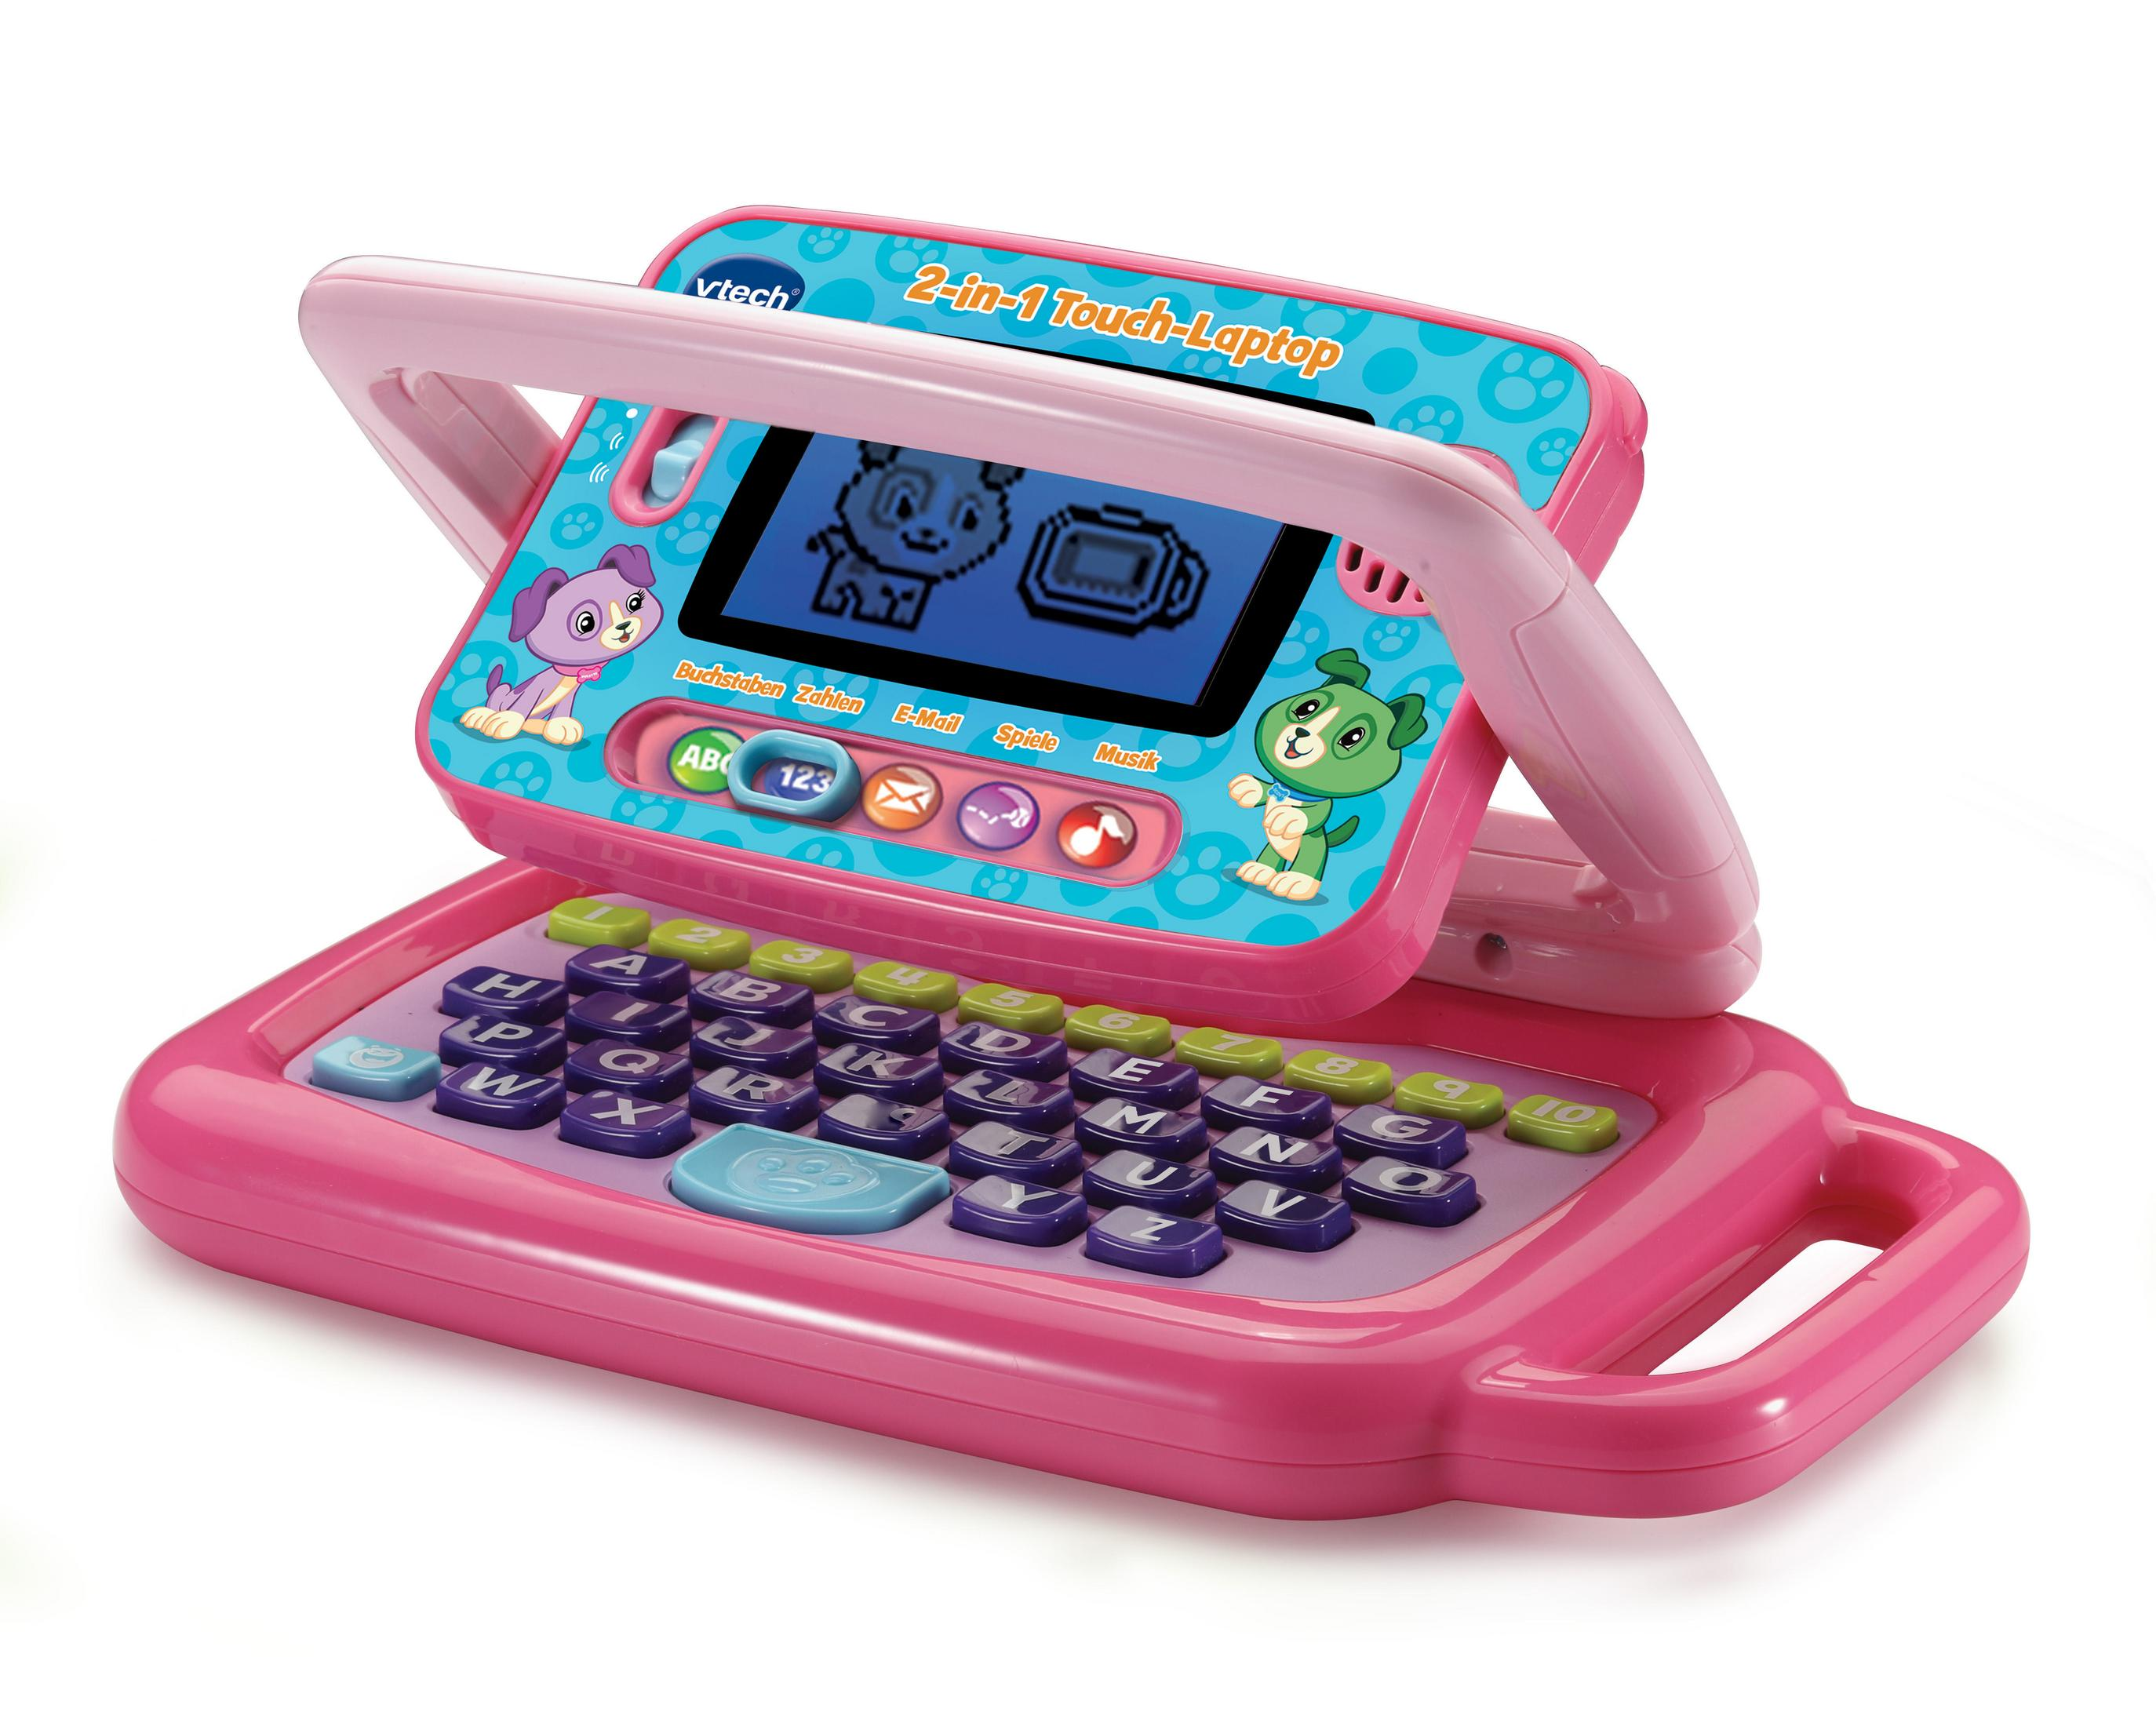 VTECH 80-600954 2-IN-1 TOUCH-LAPTOP PINK Lernlaptop, Mehrfarbig